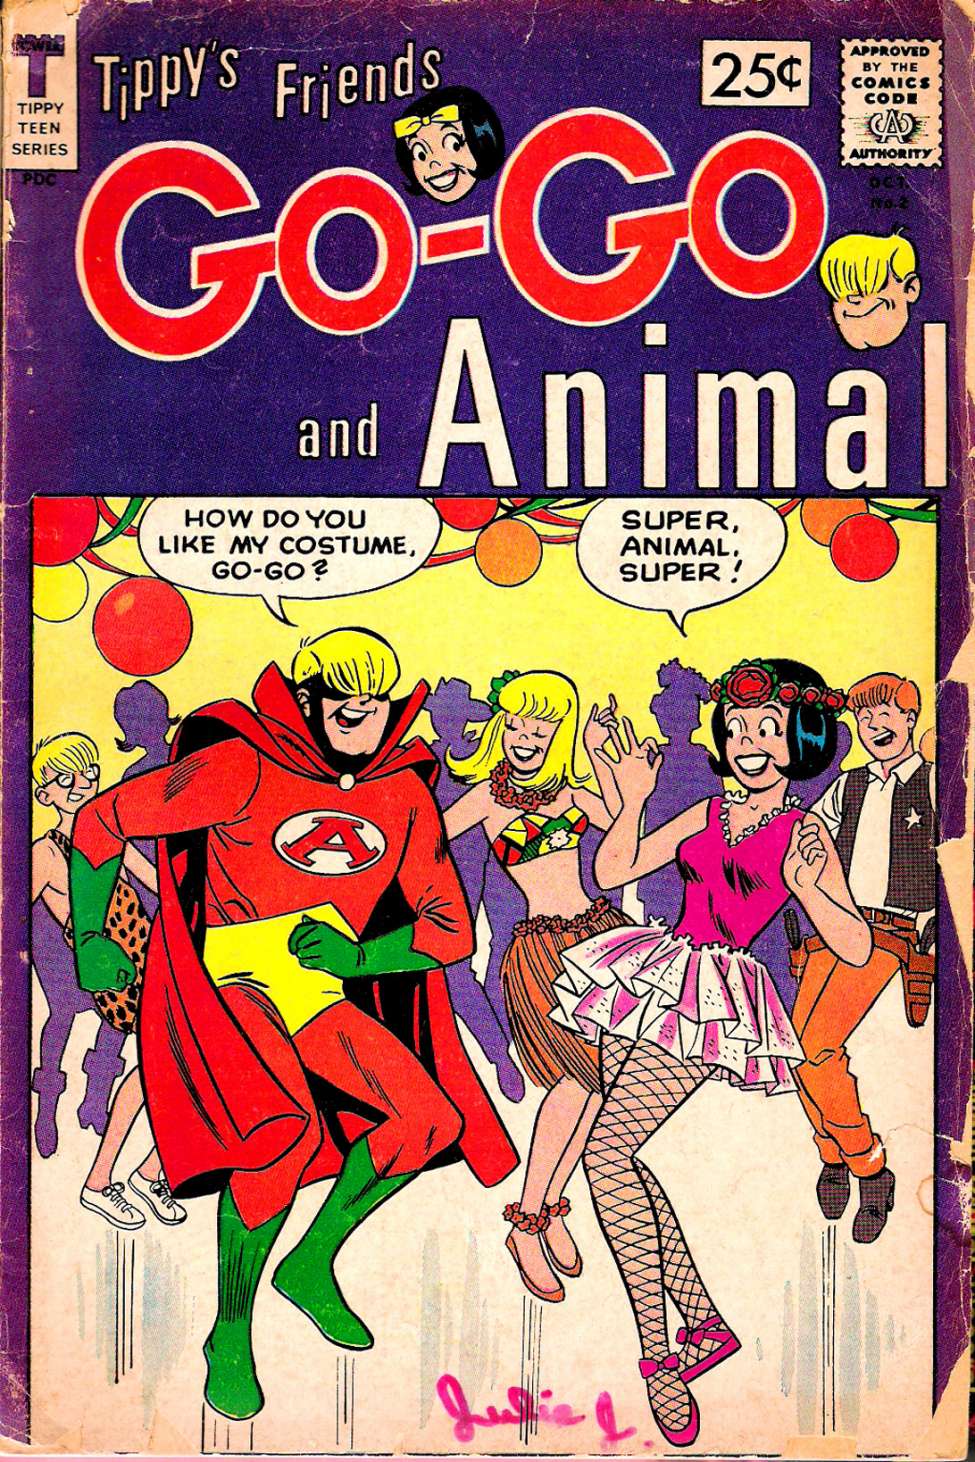 Book Cover For Tippy's Friends Go-Go and Animal 2 (inc) - Version 2